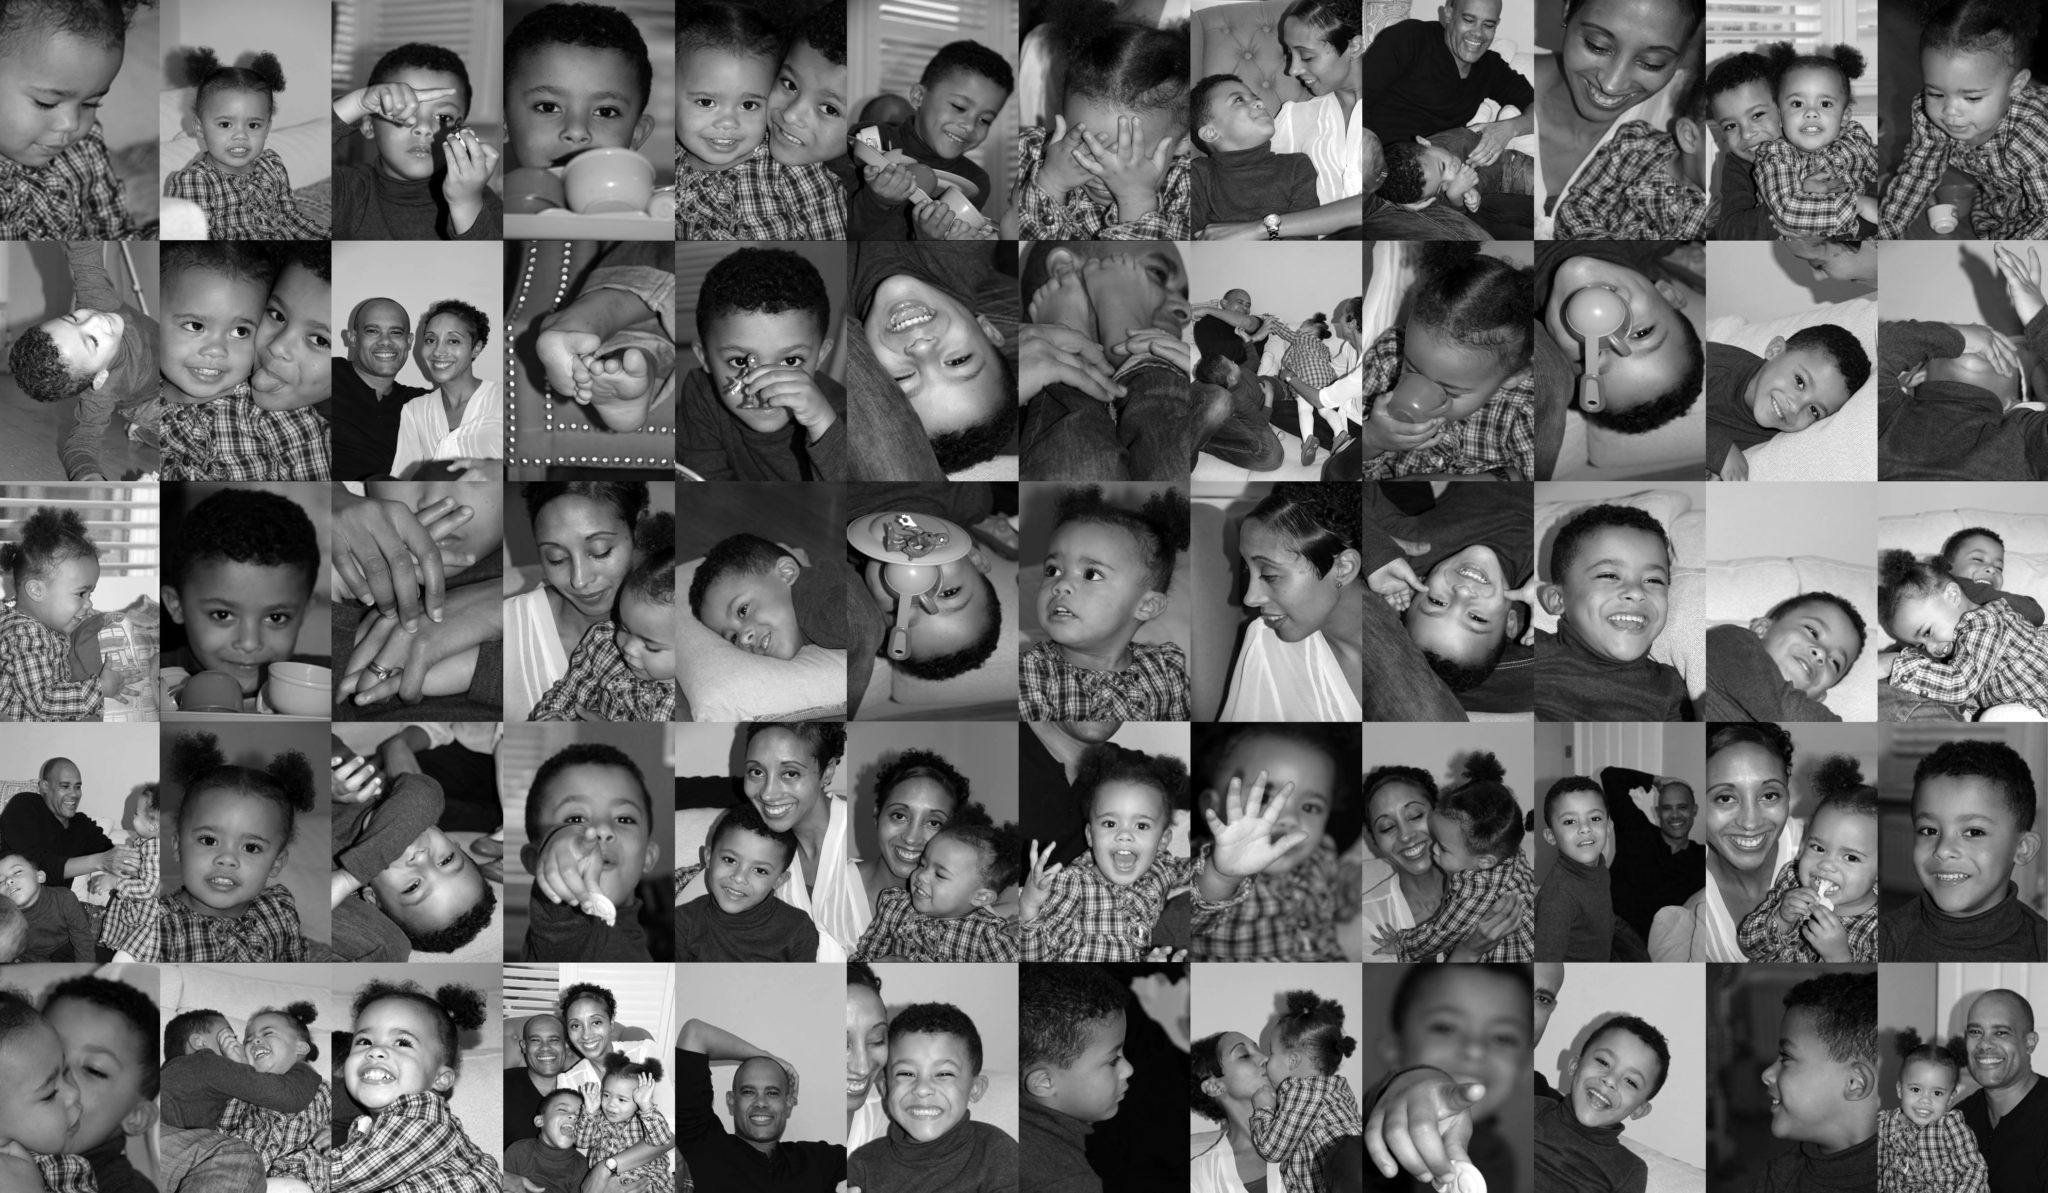 montage commission, family photography, black and white photography, fun photography,